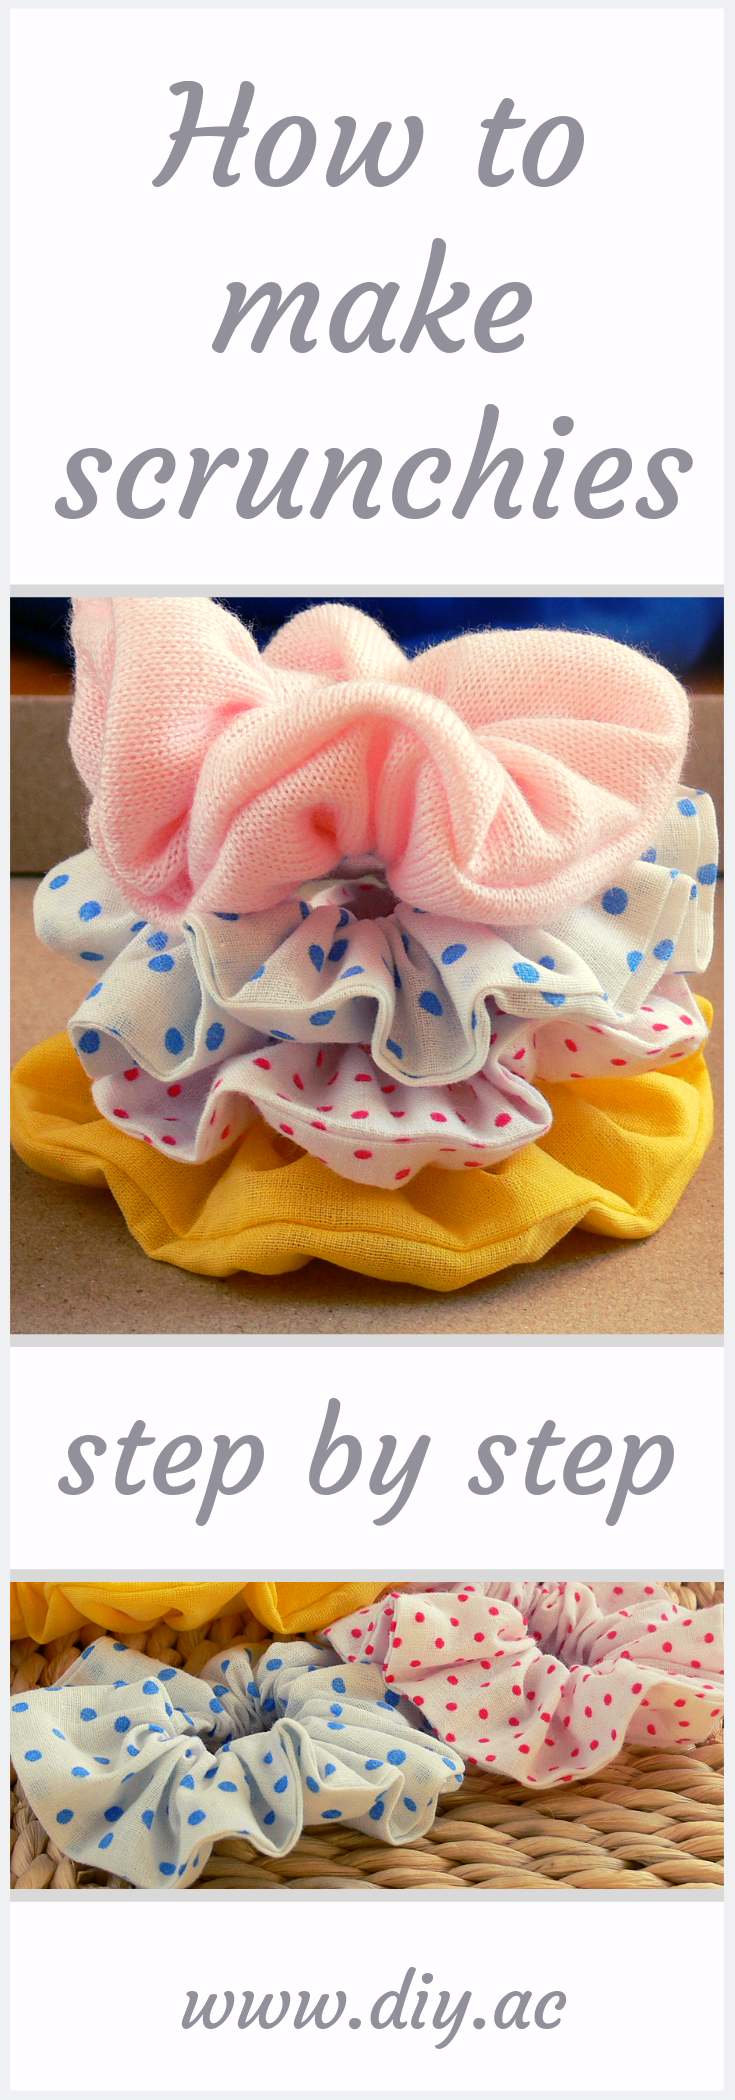 Free sewing pattern for beginners - SCRUNCHIES DIY - Free sewing pattern for beginners - SCRUNCHIES DIY -   15 diy Scrunchie step by step ideas